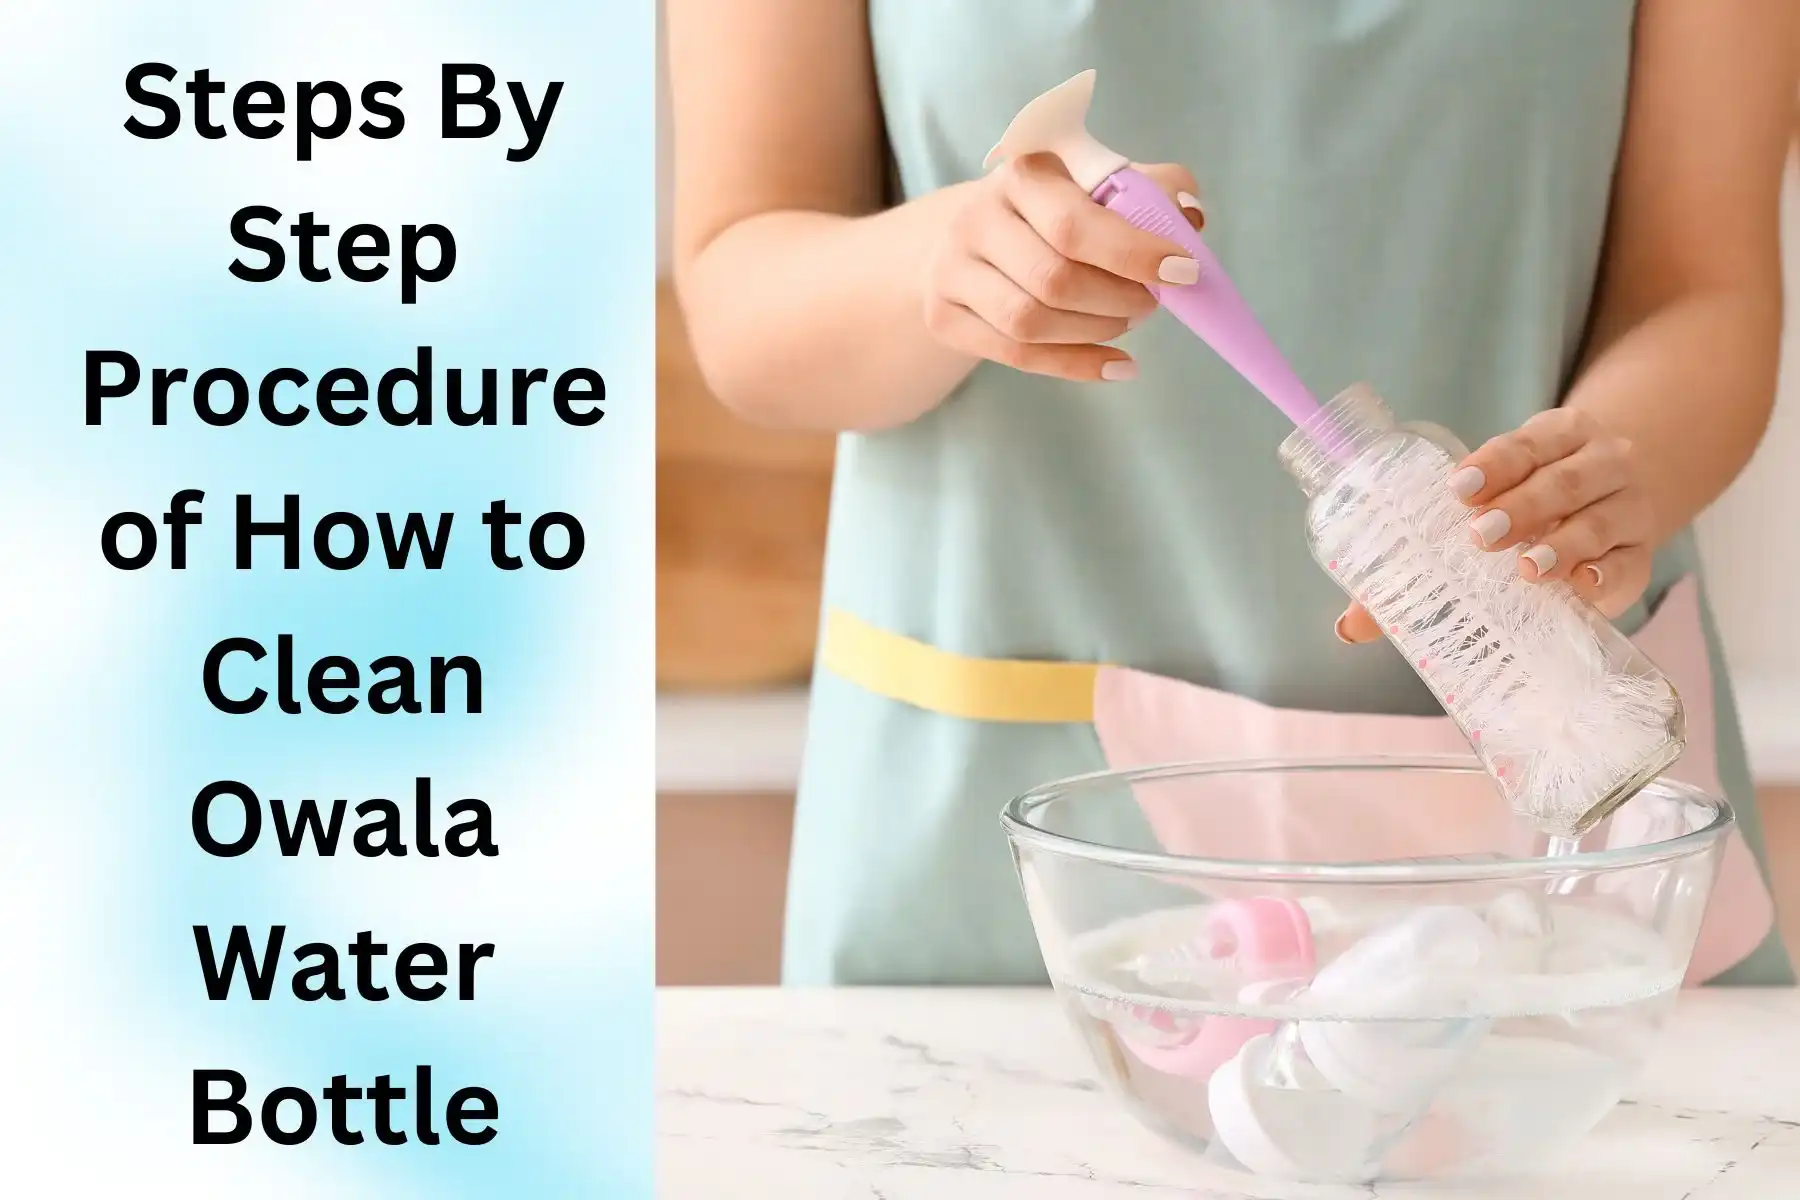 How to Clean Owala Water Bottle